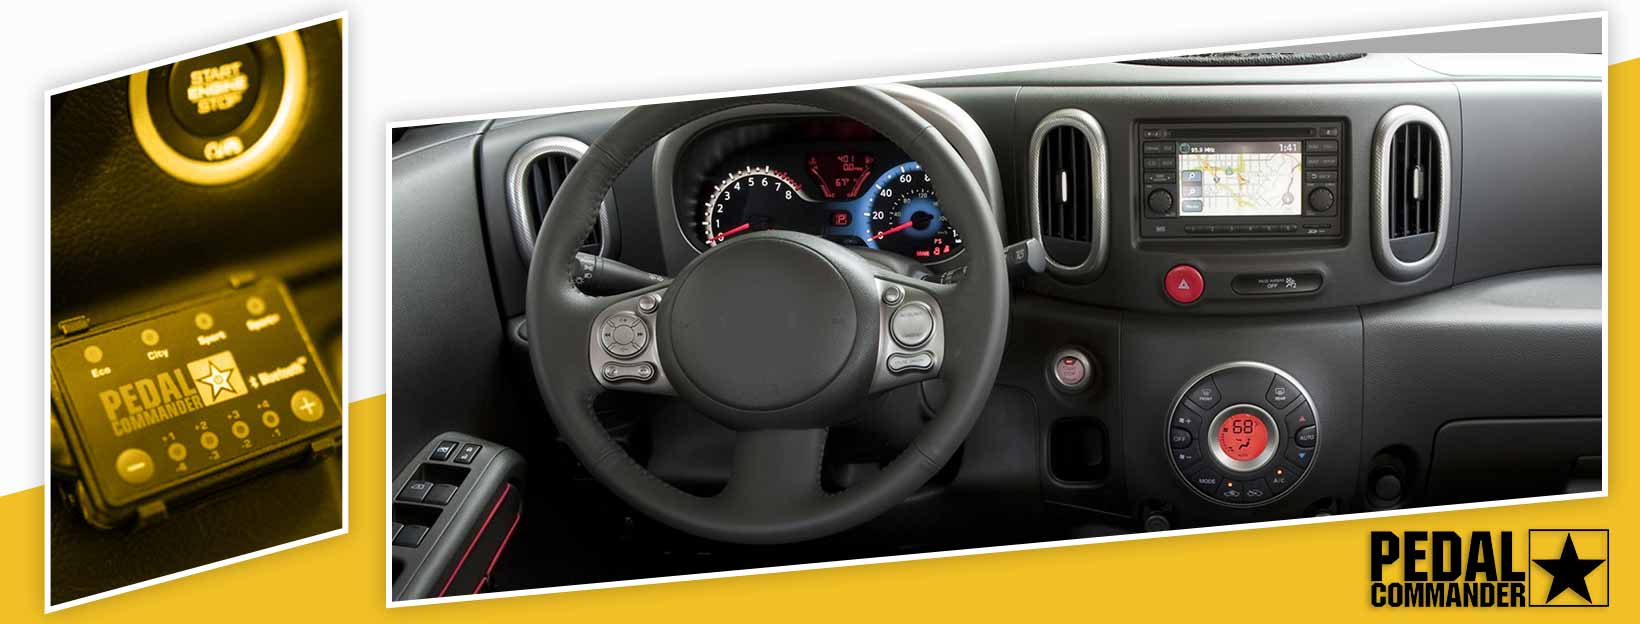 Pedal Commander for Nissan Cube - interior